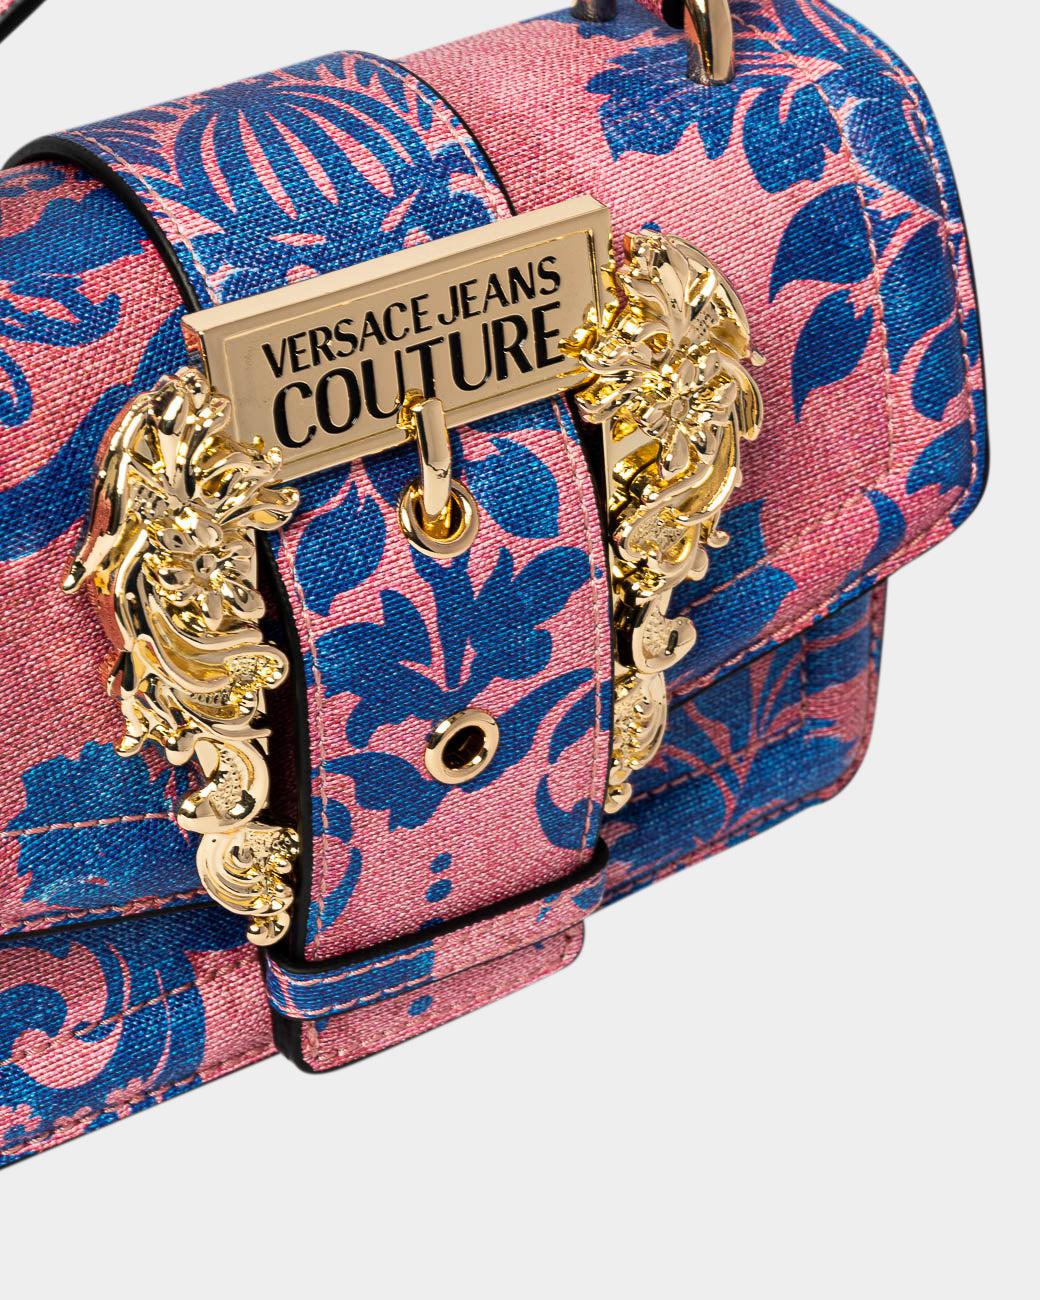 Versace Jeans Couture Floral Printed Structured Shoulder Bag (Onesize) by Myntra